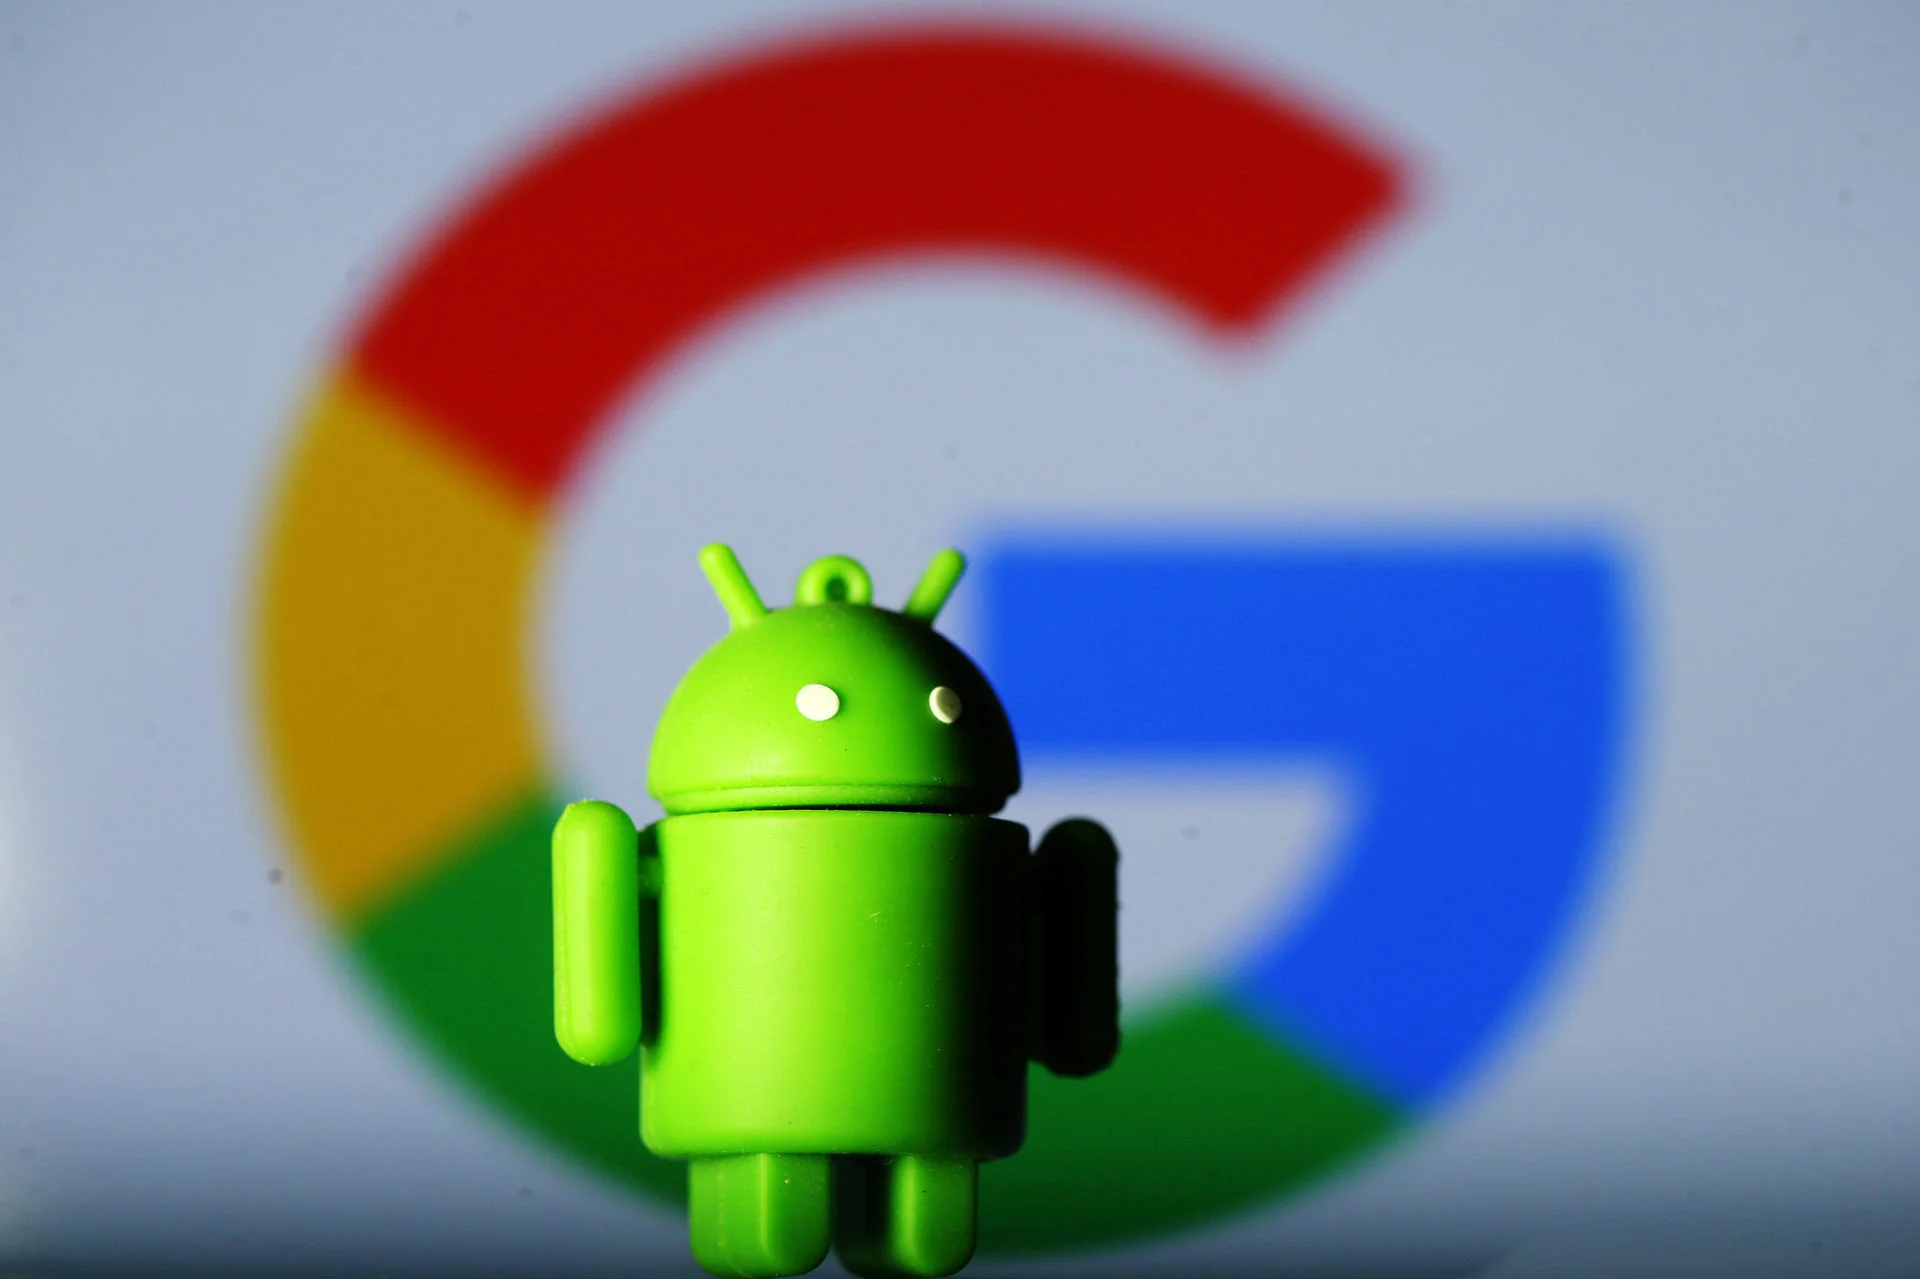 The most popular versions of Android have become known